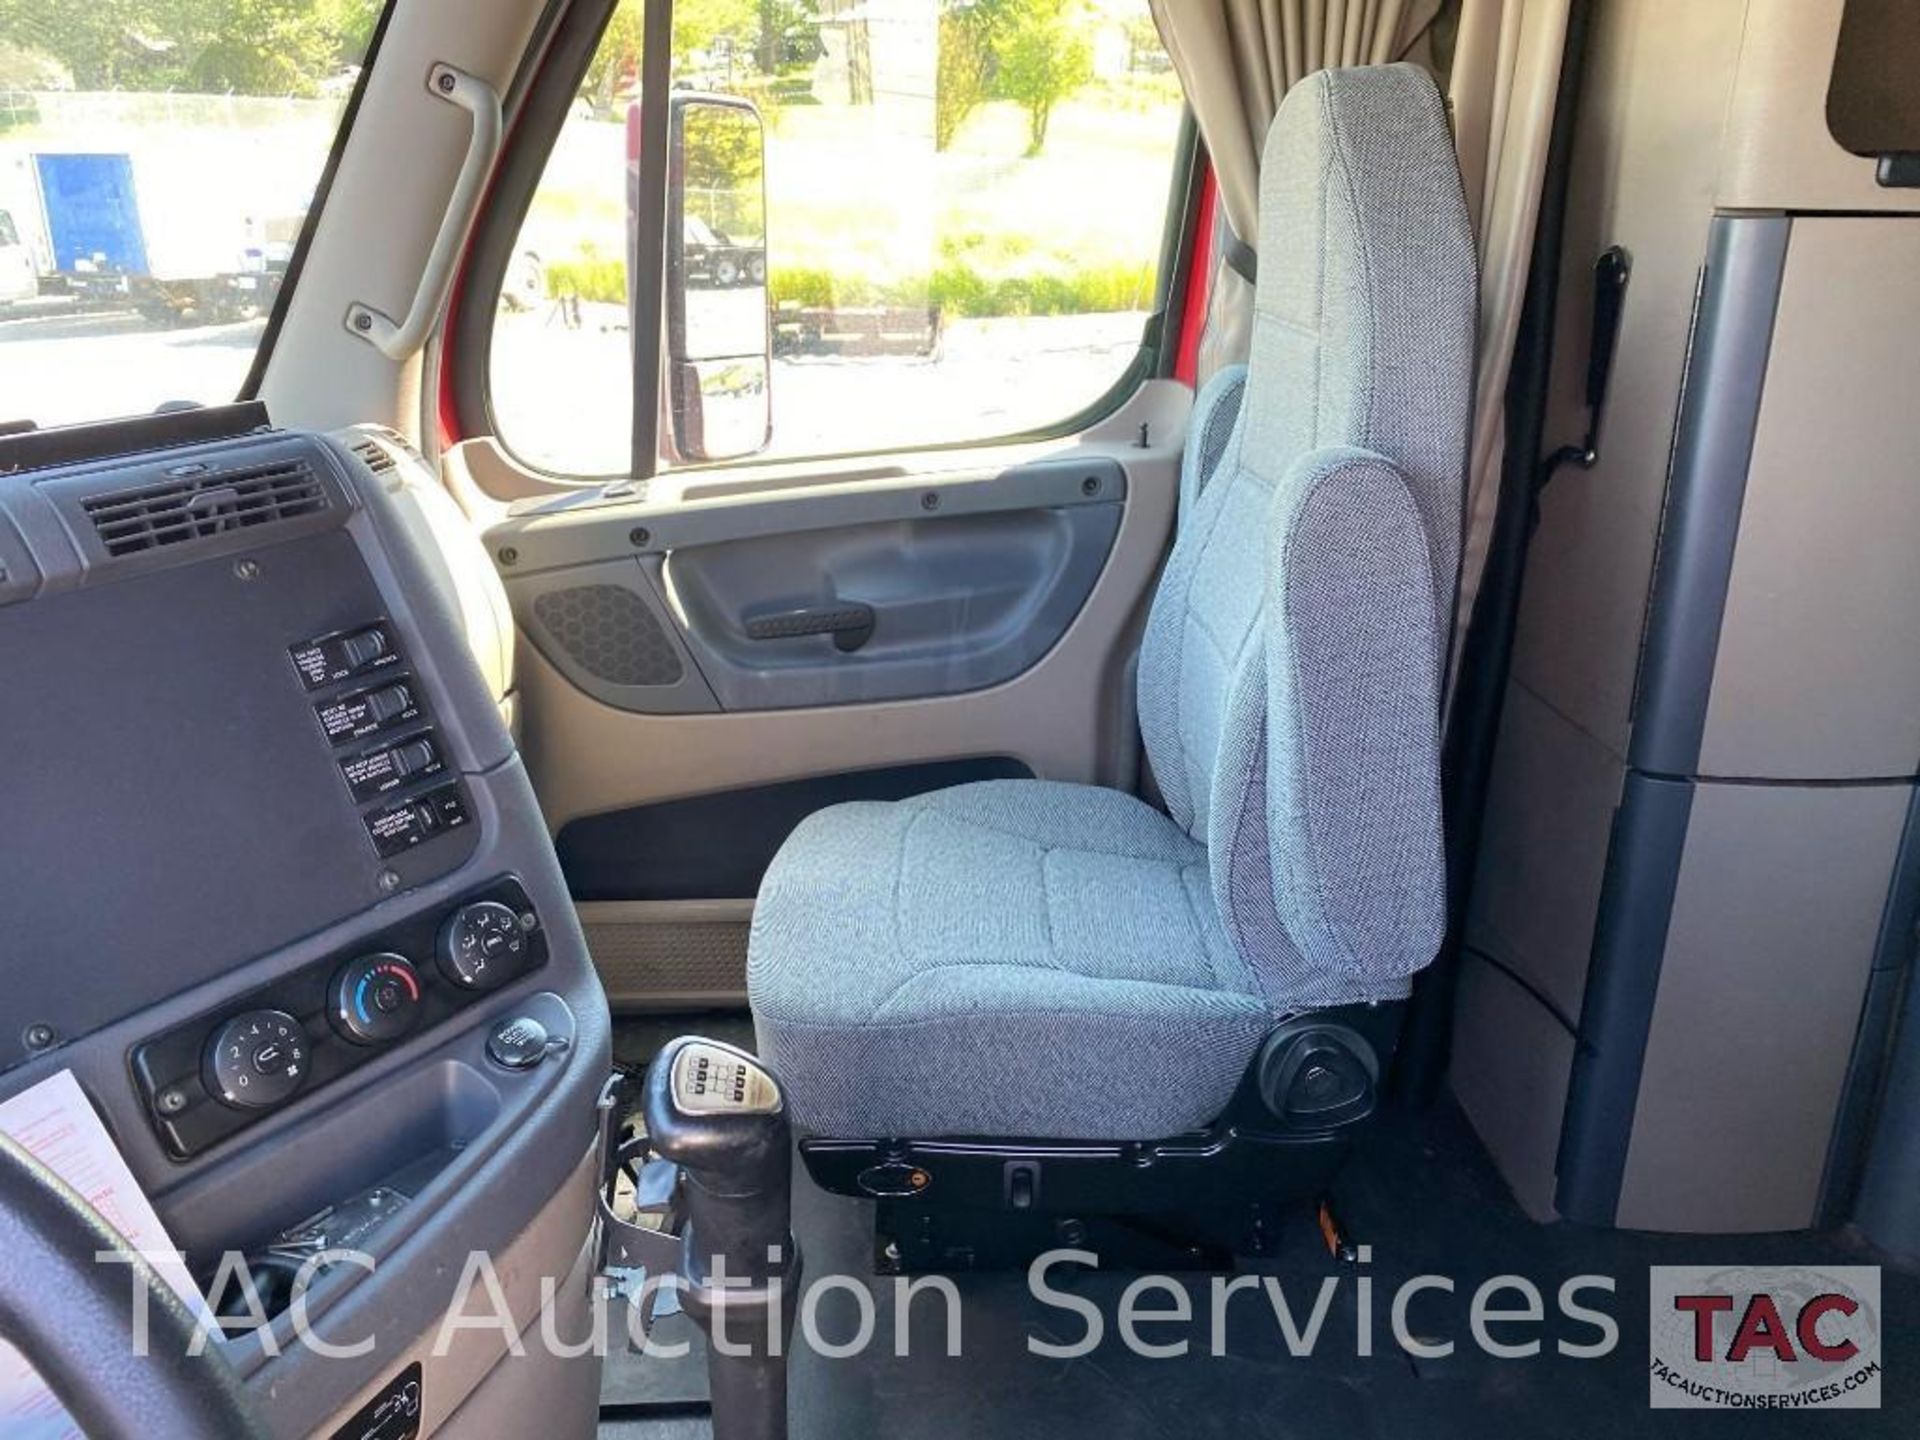 2013 Freightliner Cascadia - Image 33 of 79